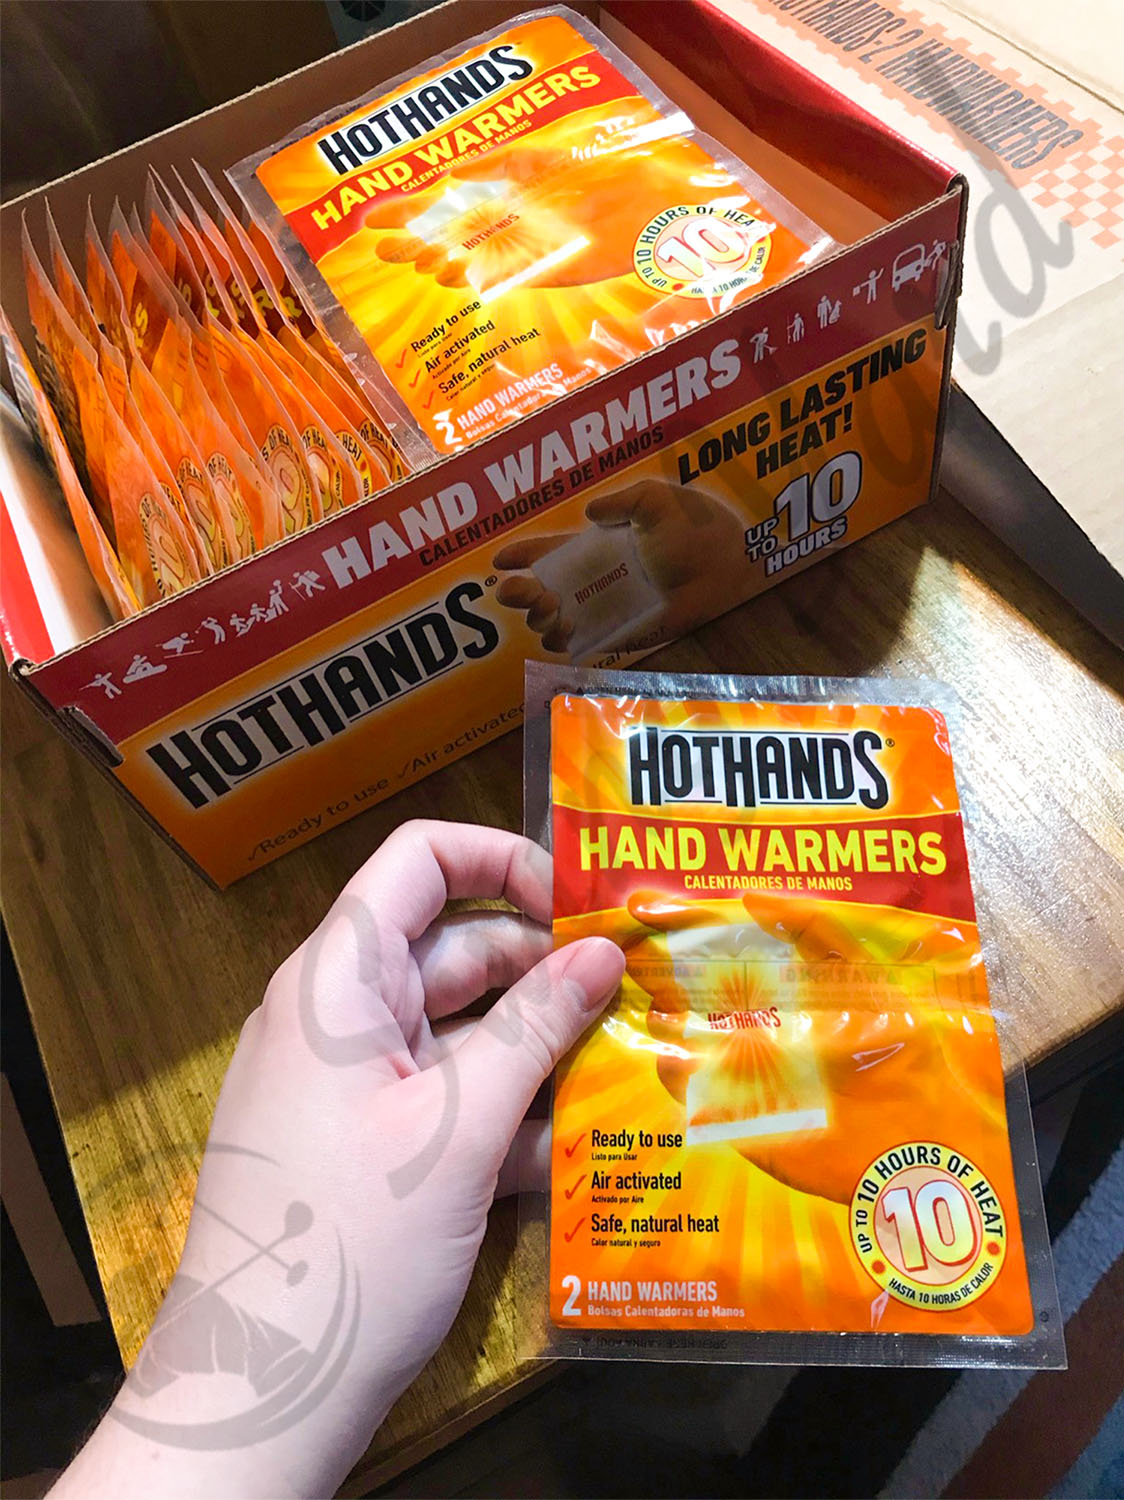 A box of Hot hands golf hand warmers on my table